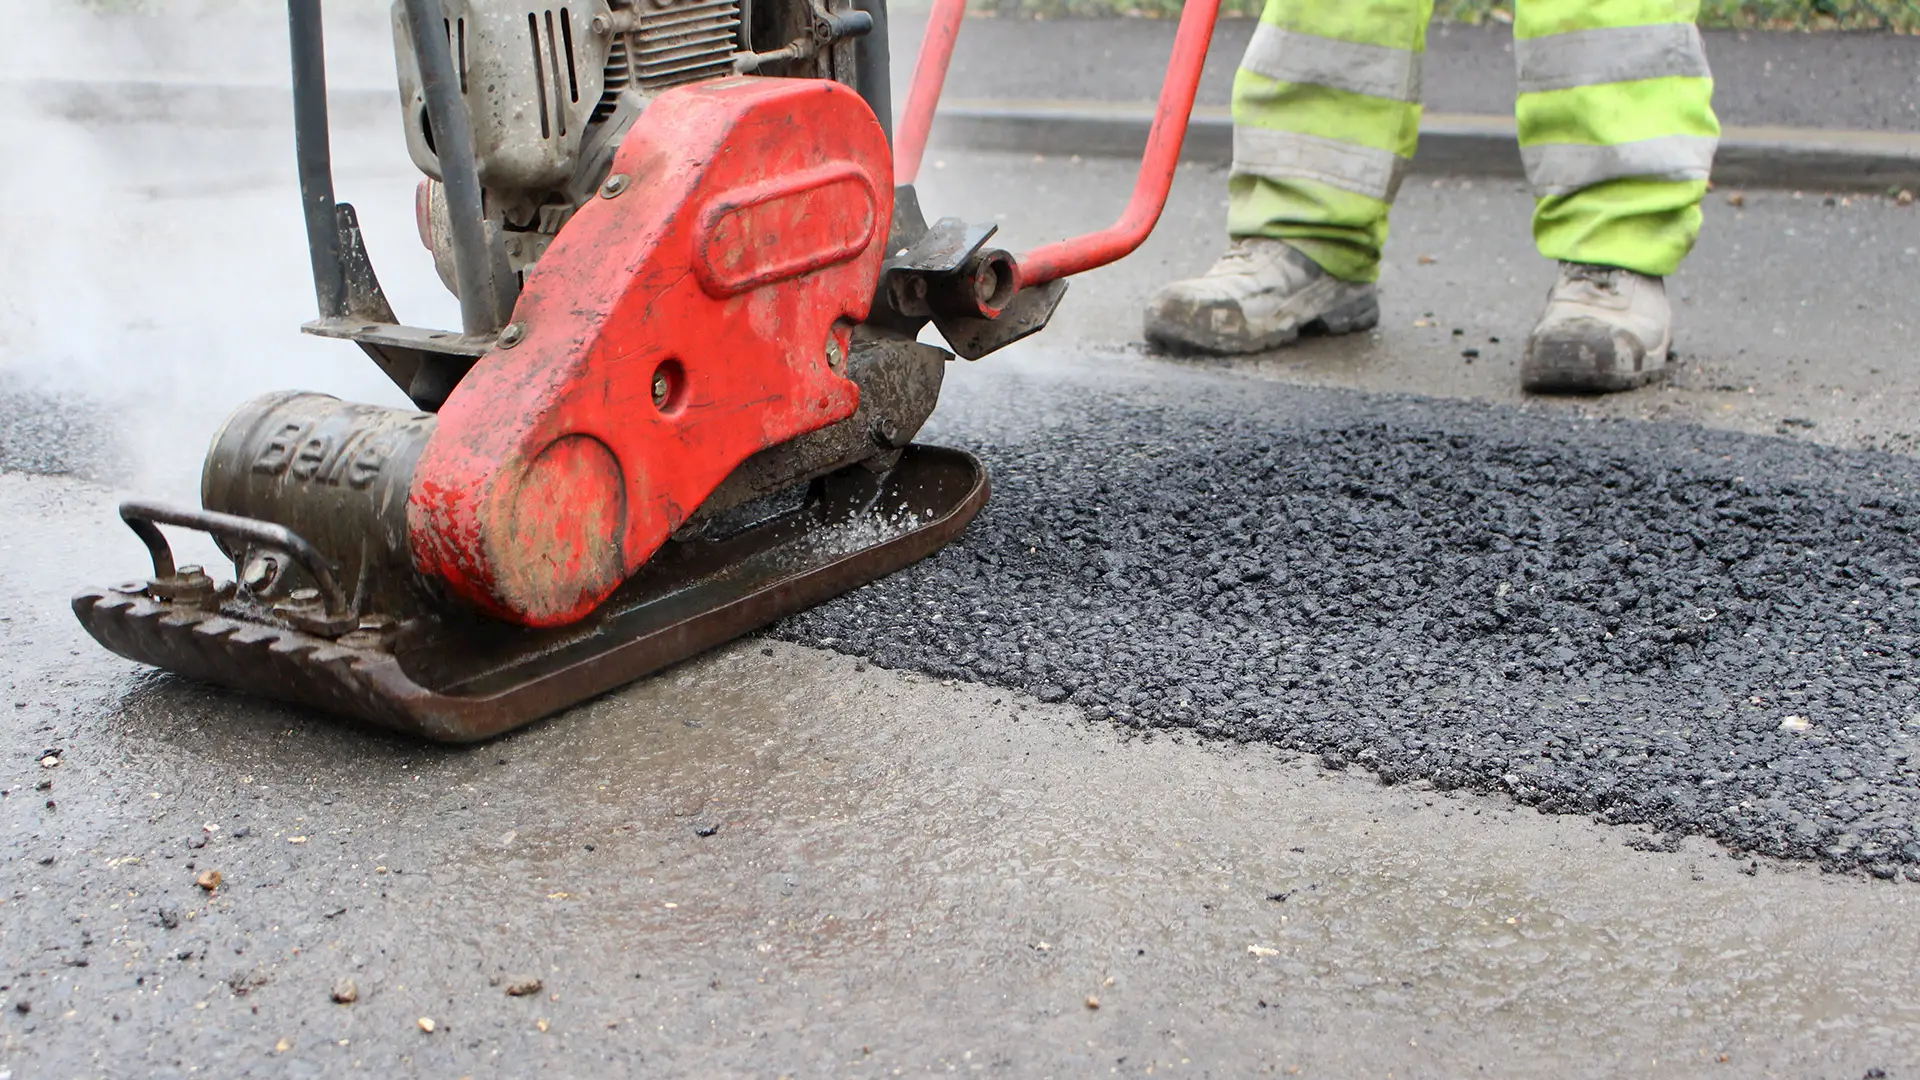 Experienced pothole repair contractors in Sheffield